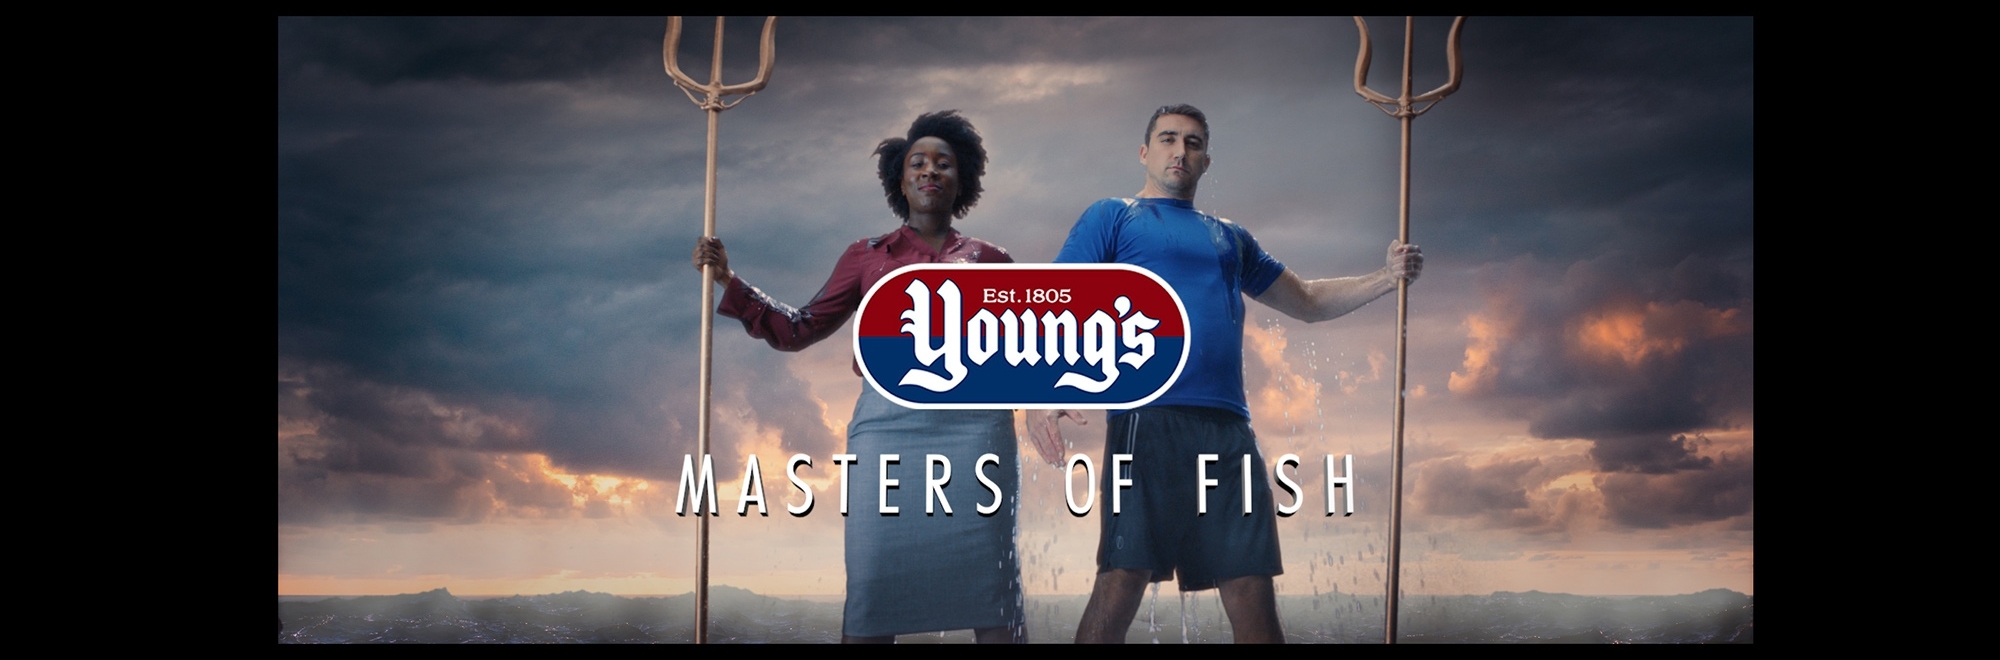 Young’s Seafood makes a splash with “Masters of Fish” in inspirational new campaign by Quiet Storm